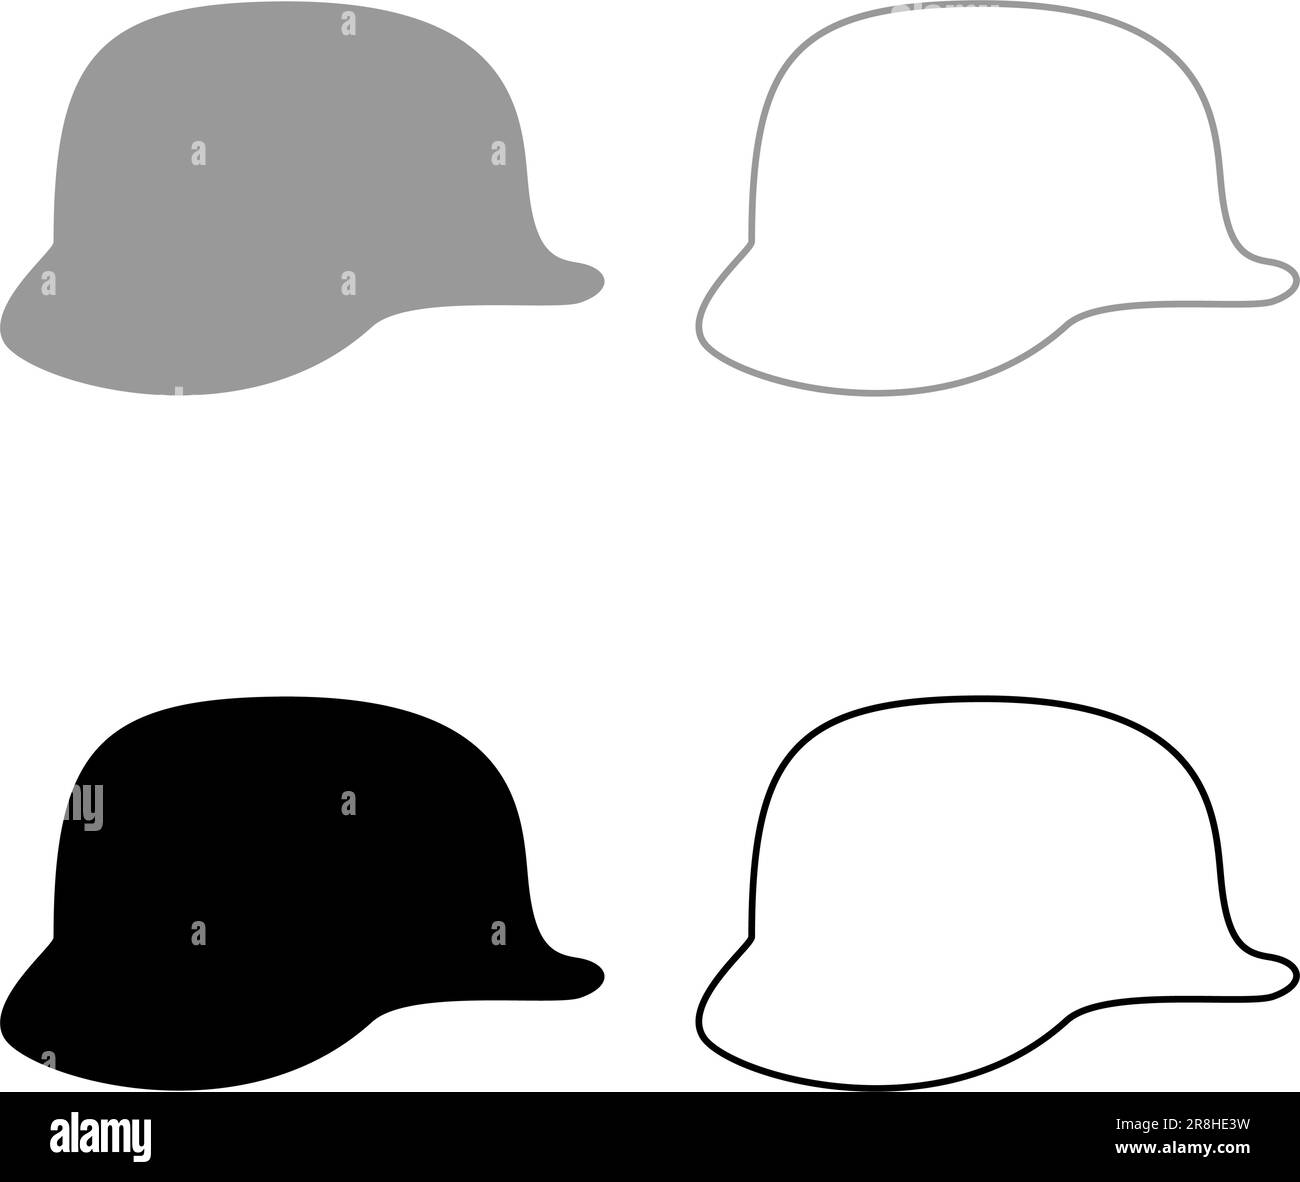 German helmet of World War two 2 stahlhelm ww2 set icon grey black color vector illustration image simple solid fill outline contour line thin flat Stock Vector